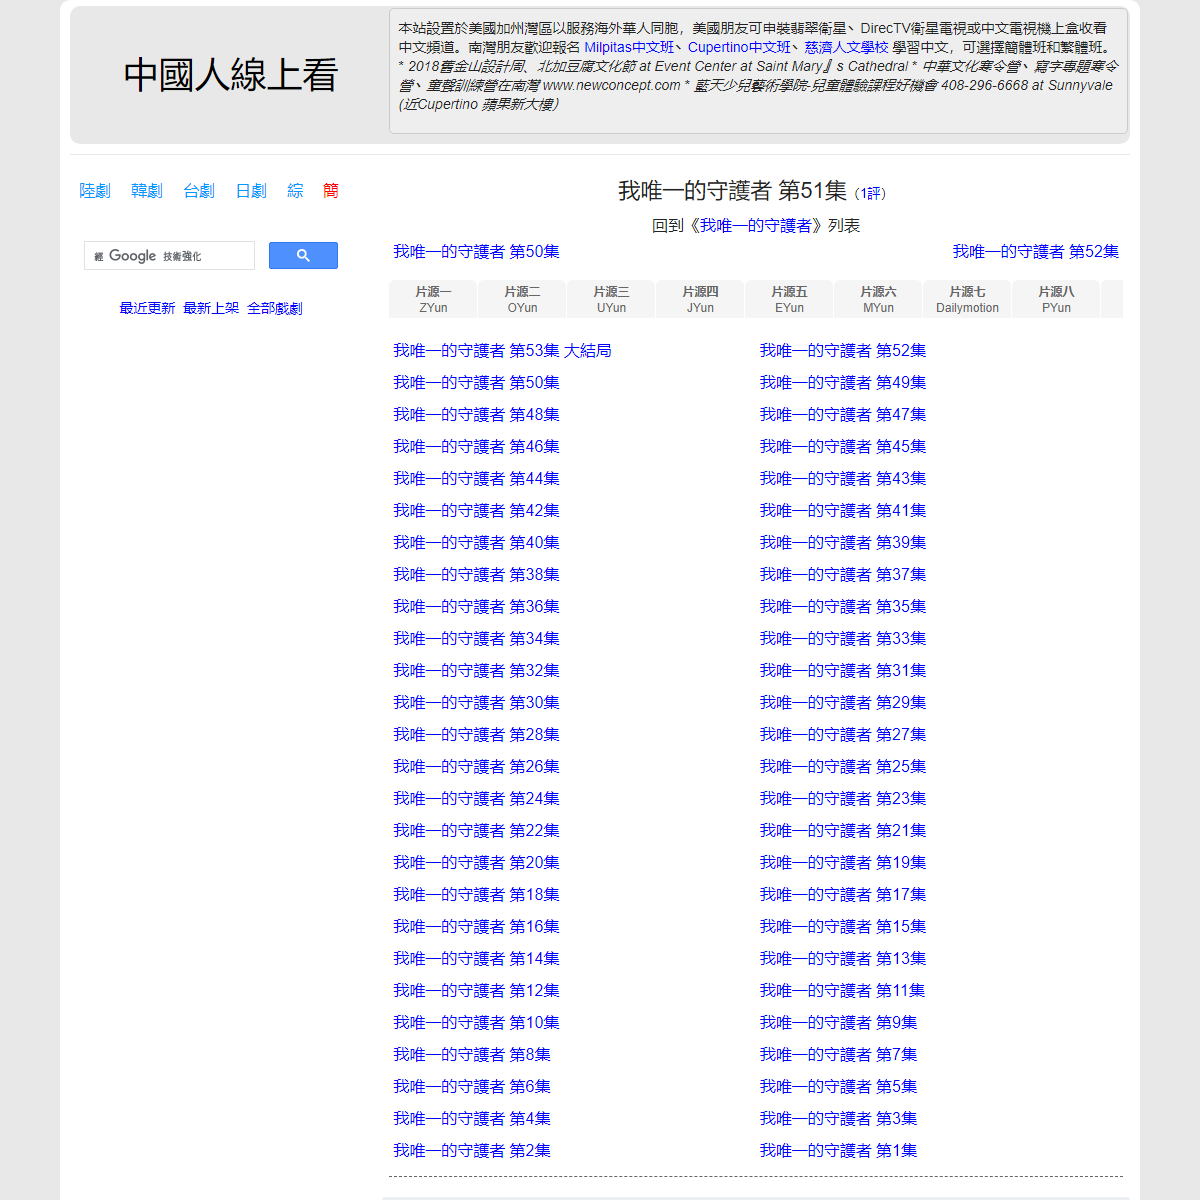 A complete backup of https://chinaq.tv/kr180915/51.html